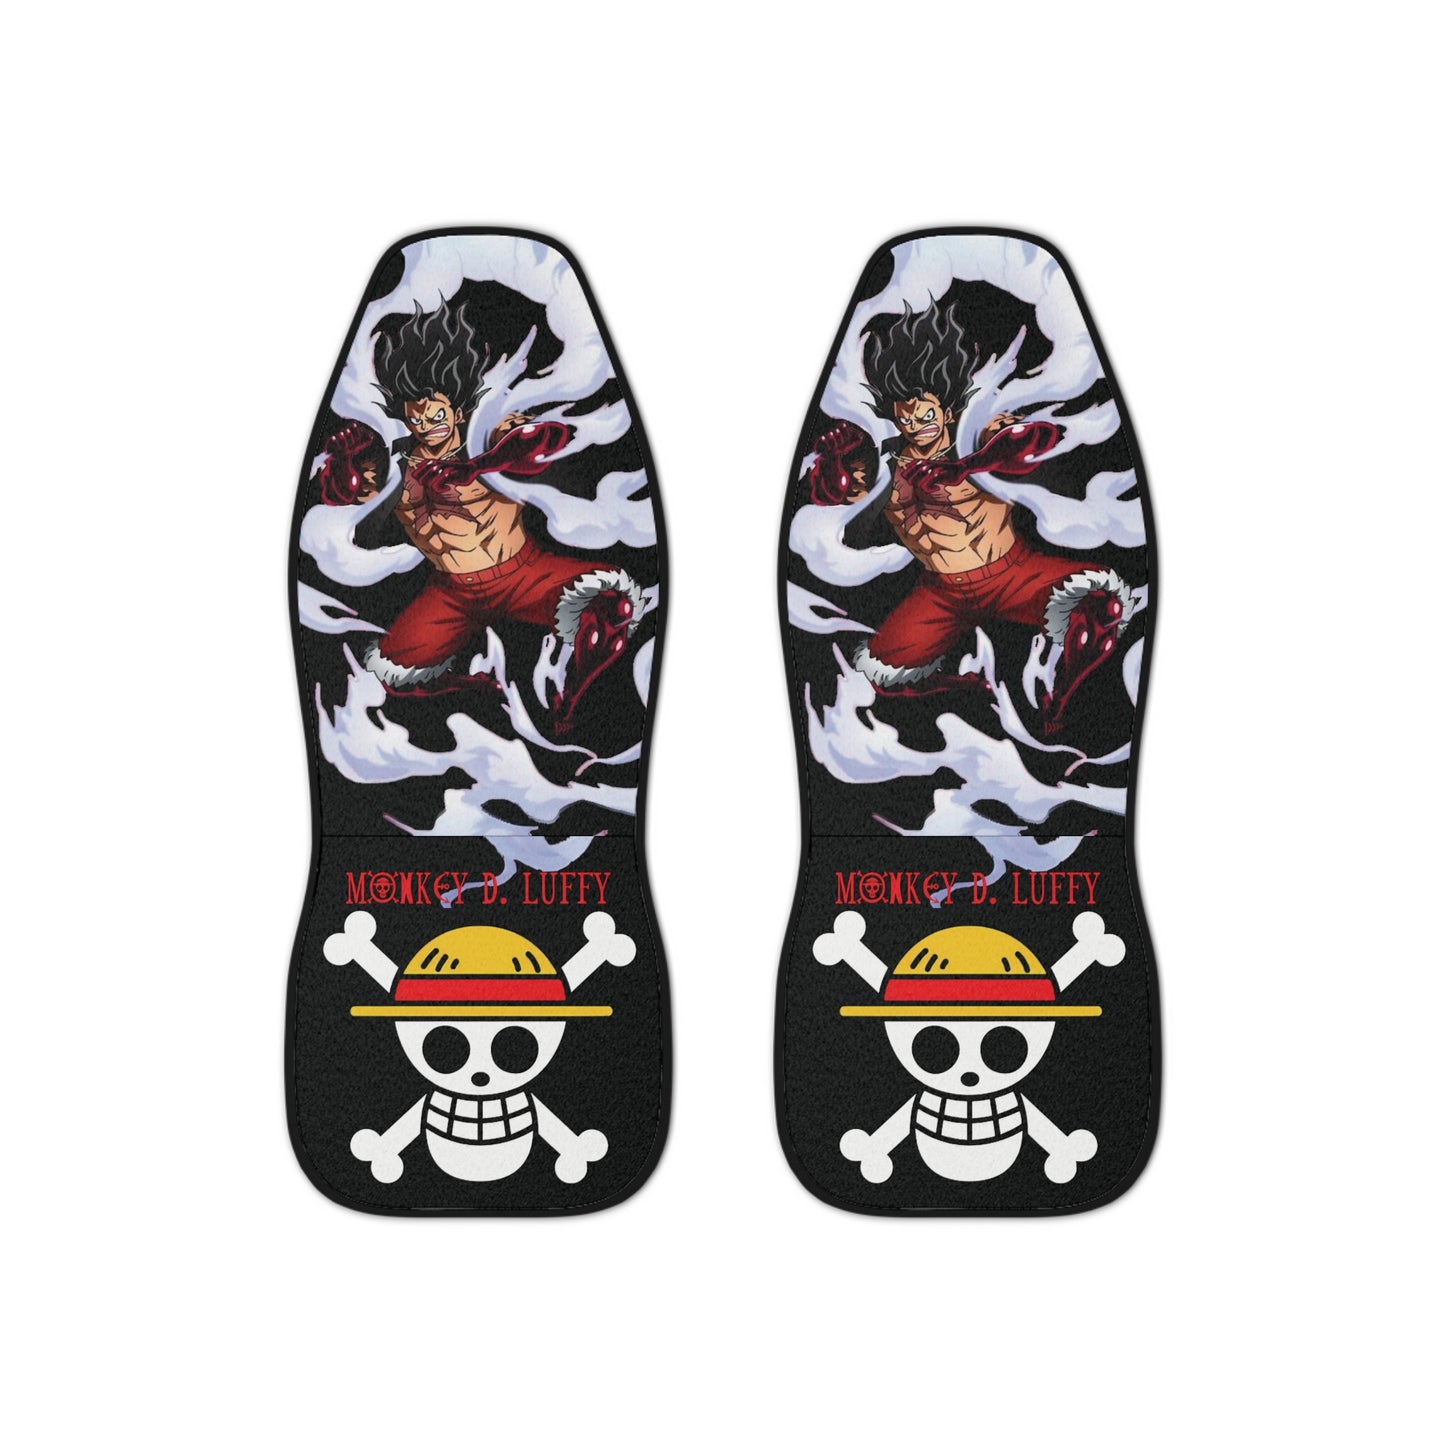 One Piece Luffy Gear 4 Snakeman Car Seat Covers